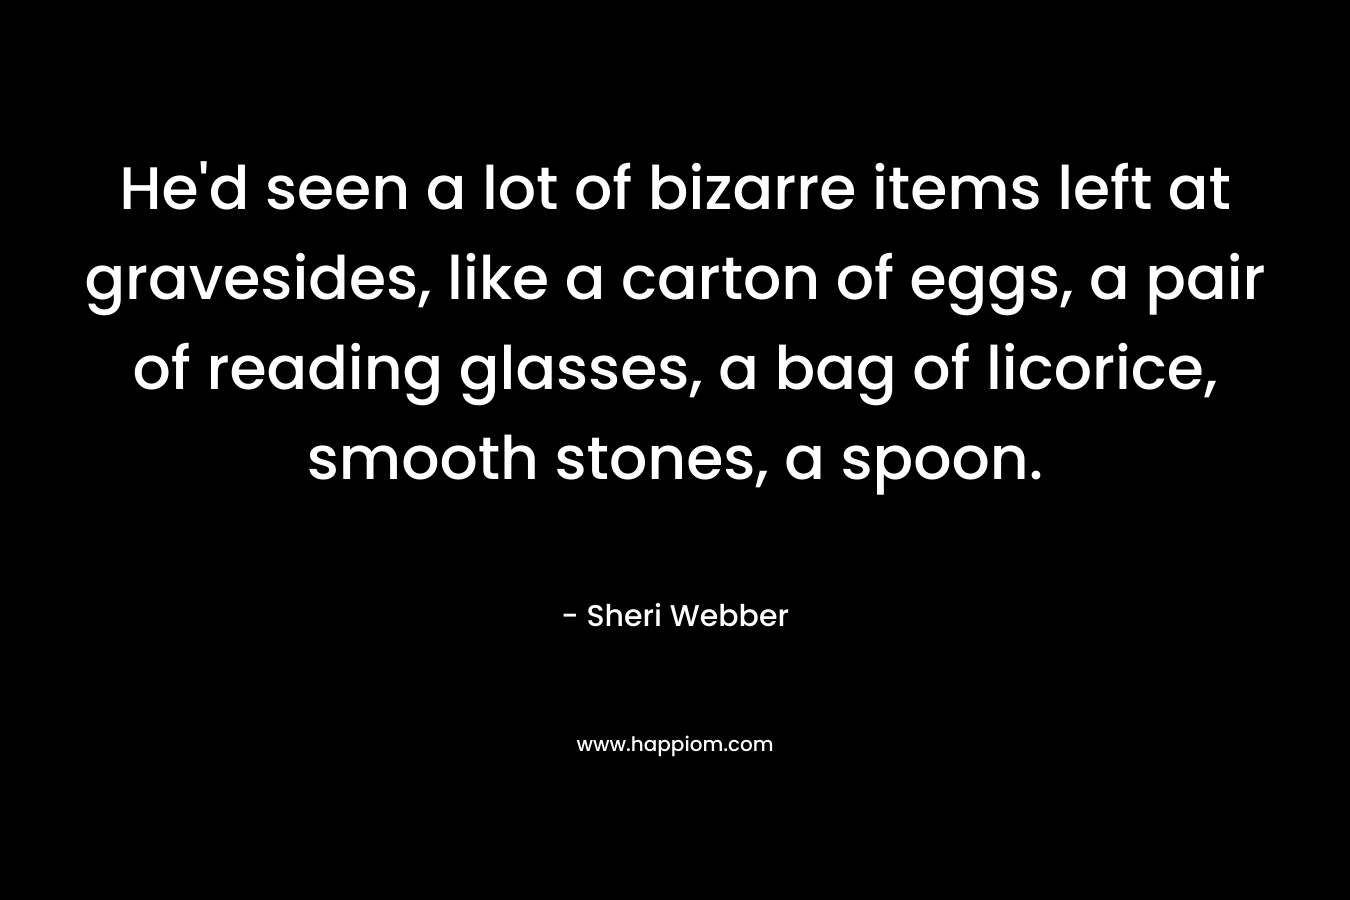 He’d seen a lot of bizarre items left at gravesides, like a carton of eggs, a pair of reading glasses, a bag of licorice, smooth stones, a spoon. – Sheri Webber